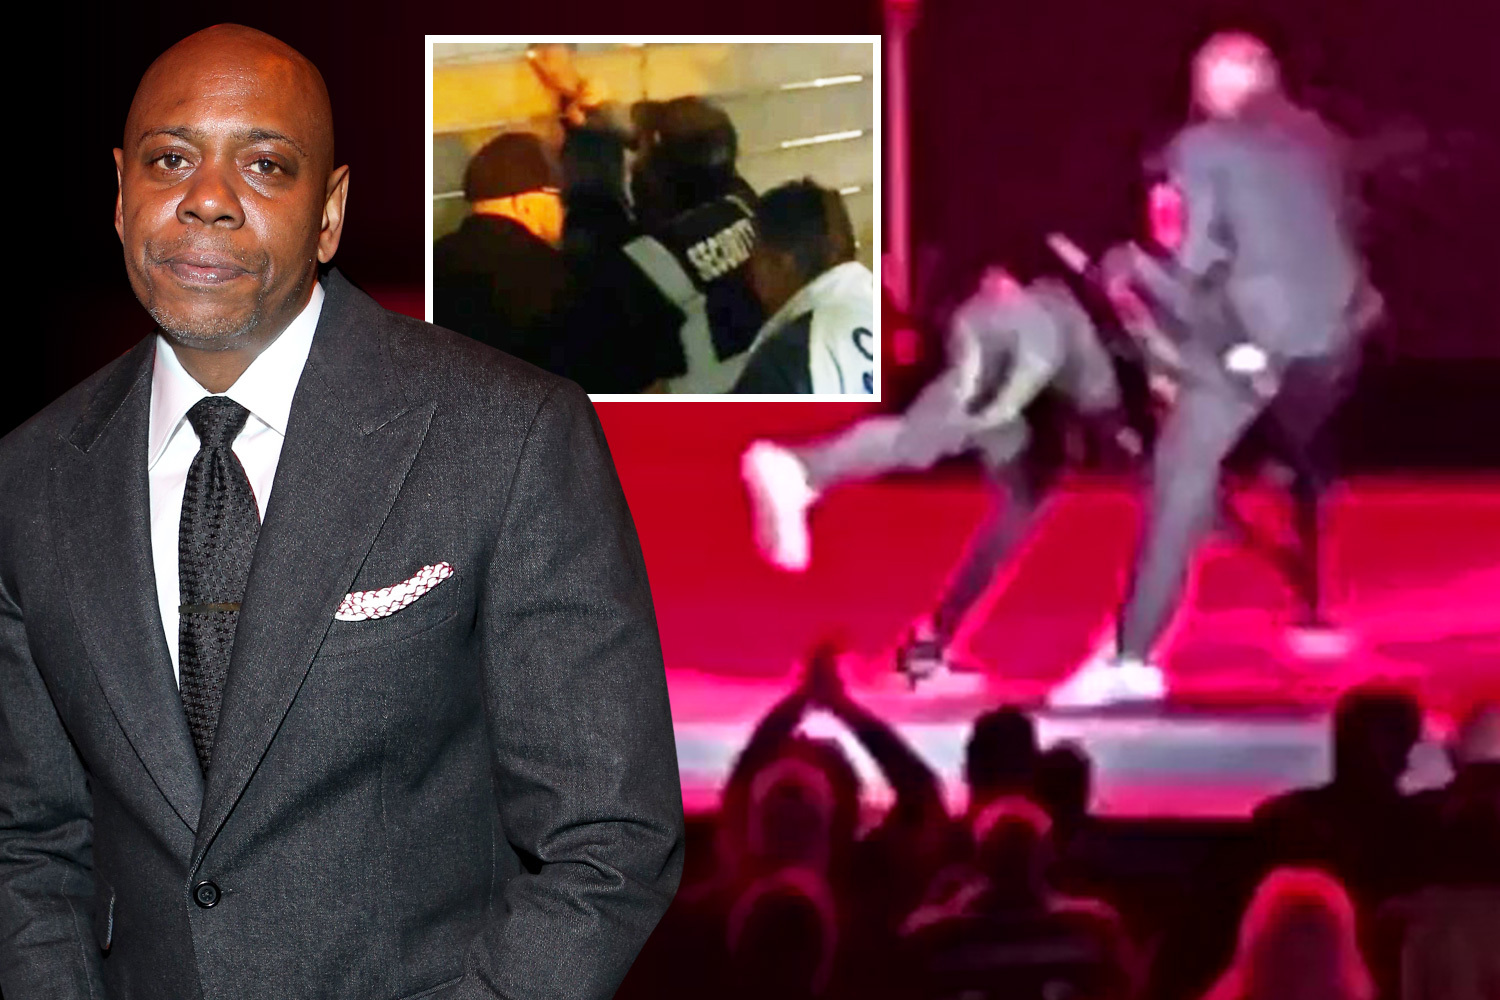 Chappelle tackled by man with GUN before Chris Rock jokes: 'Is that Will Smith?'